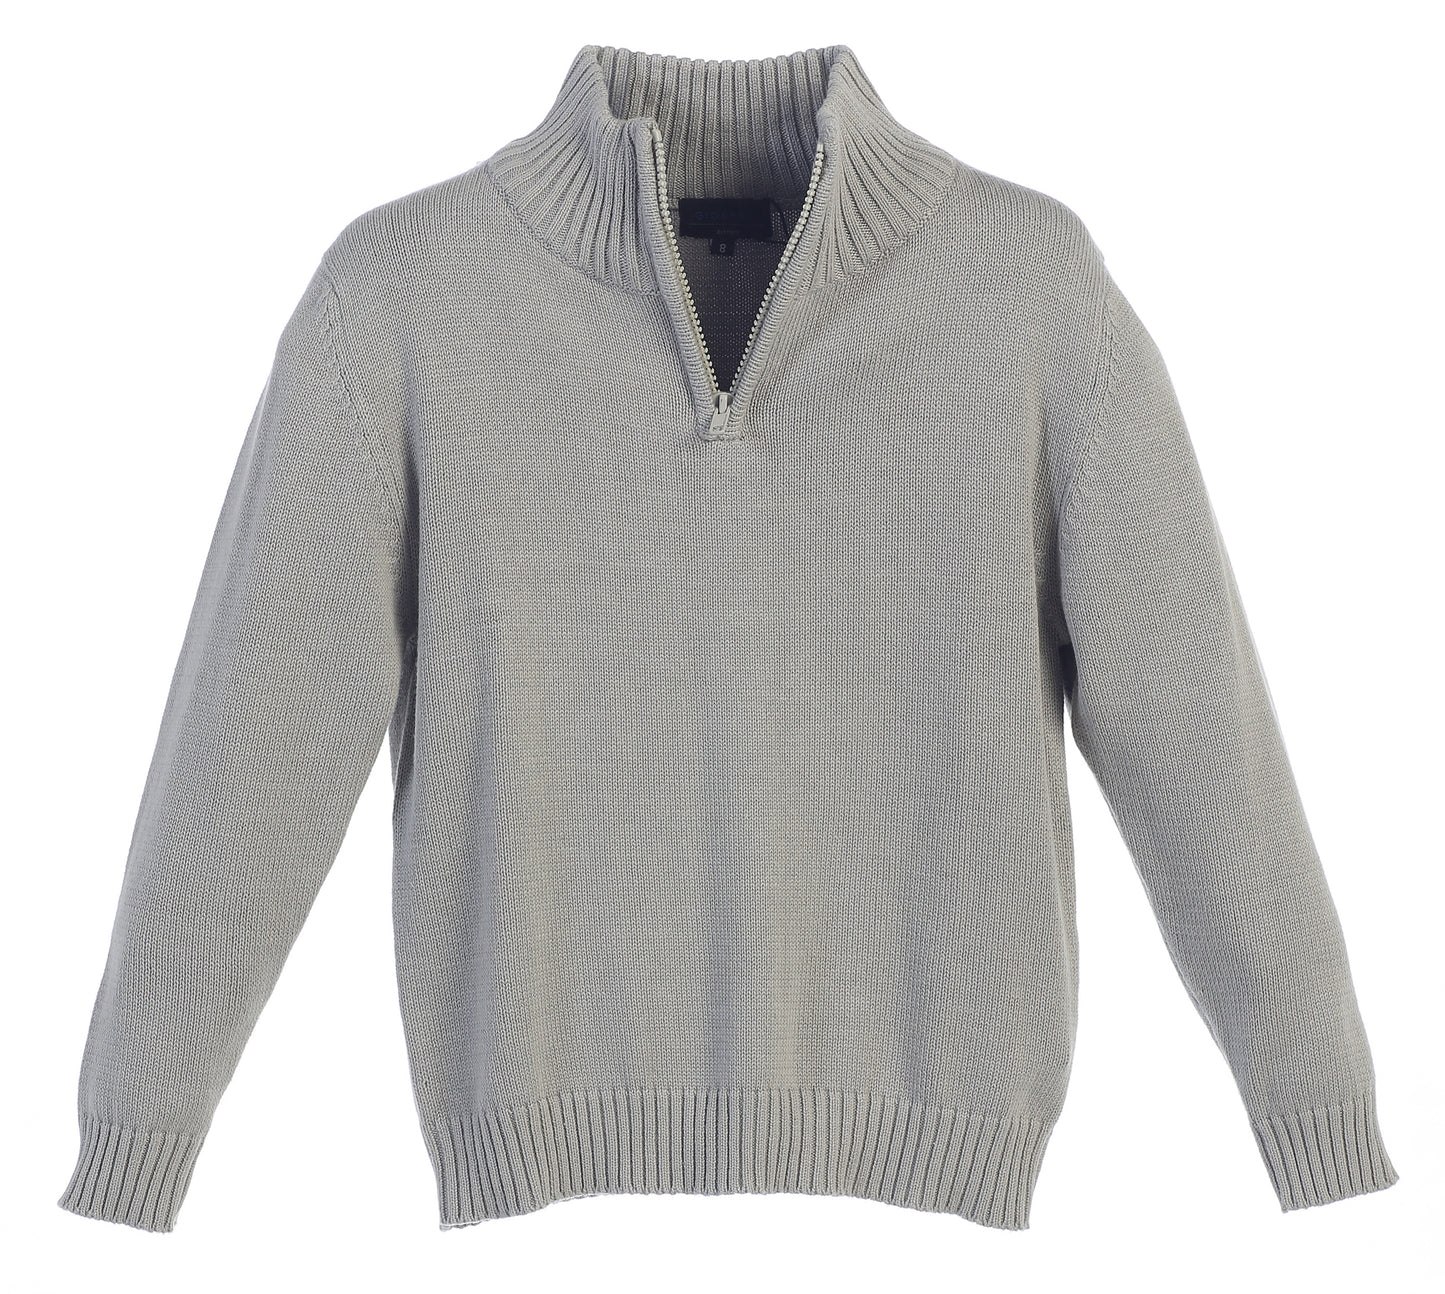 Knitted Half Zip 100% Cotton Sweater - Gray